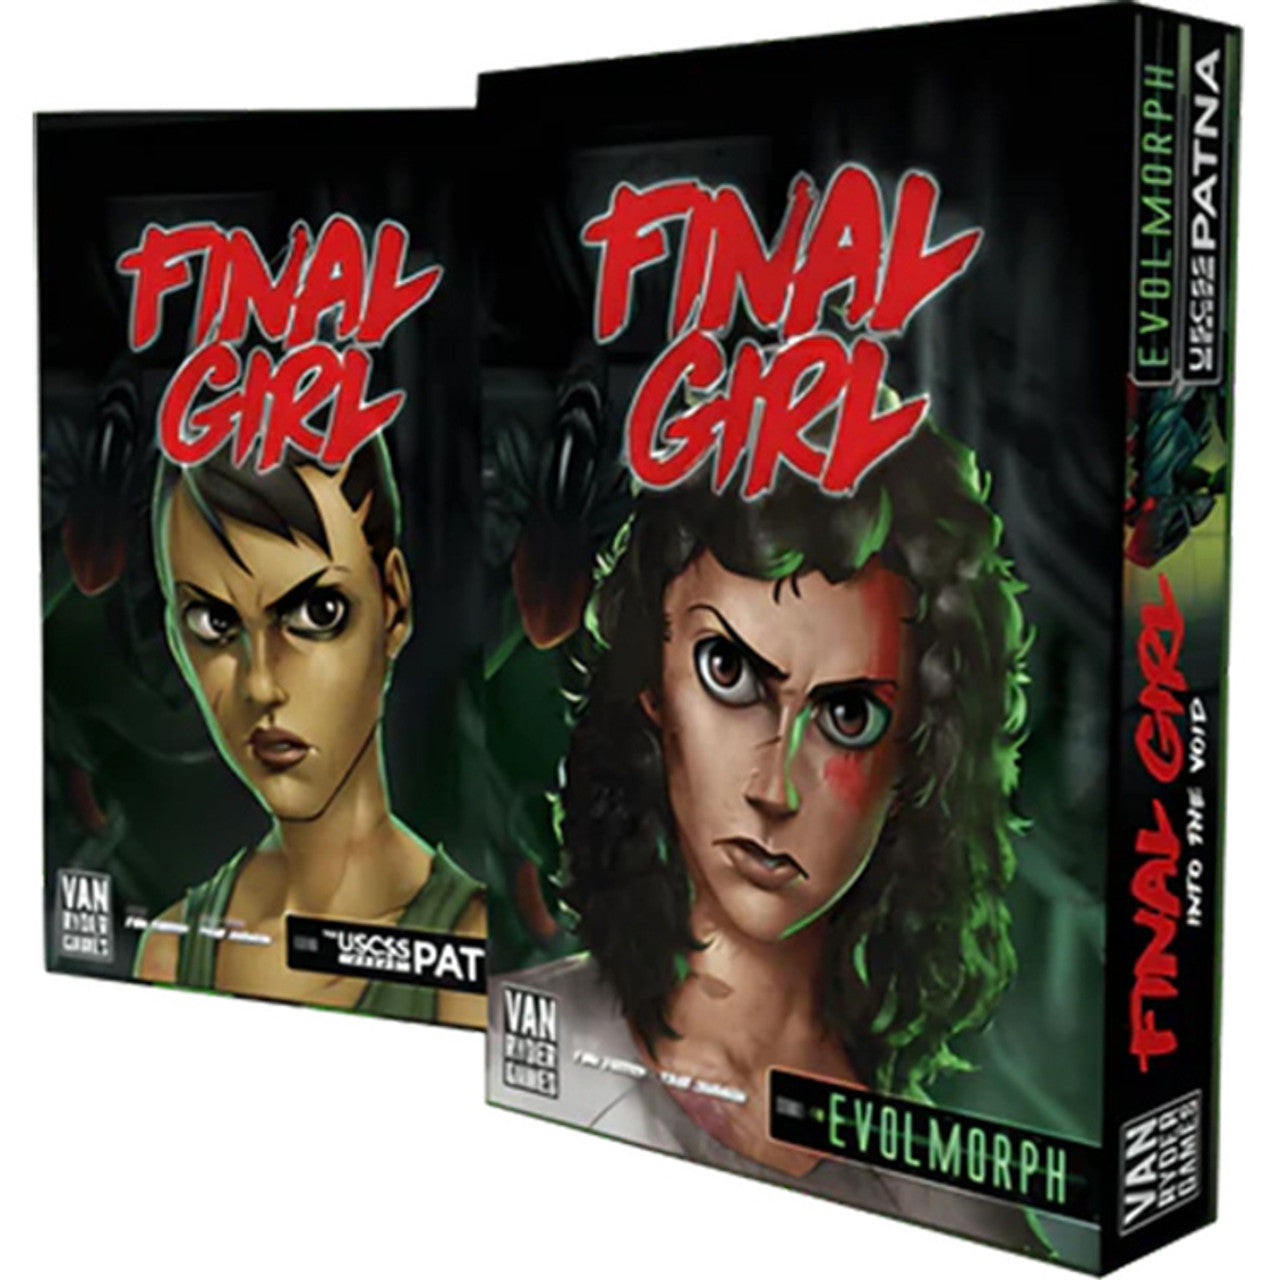 Final Girl: Series 2 - Feature Film Expansion: Into the Void